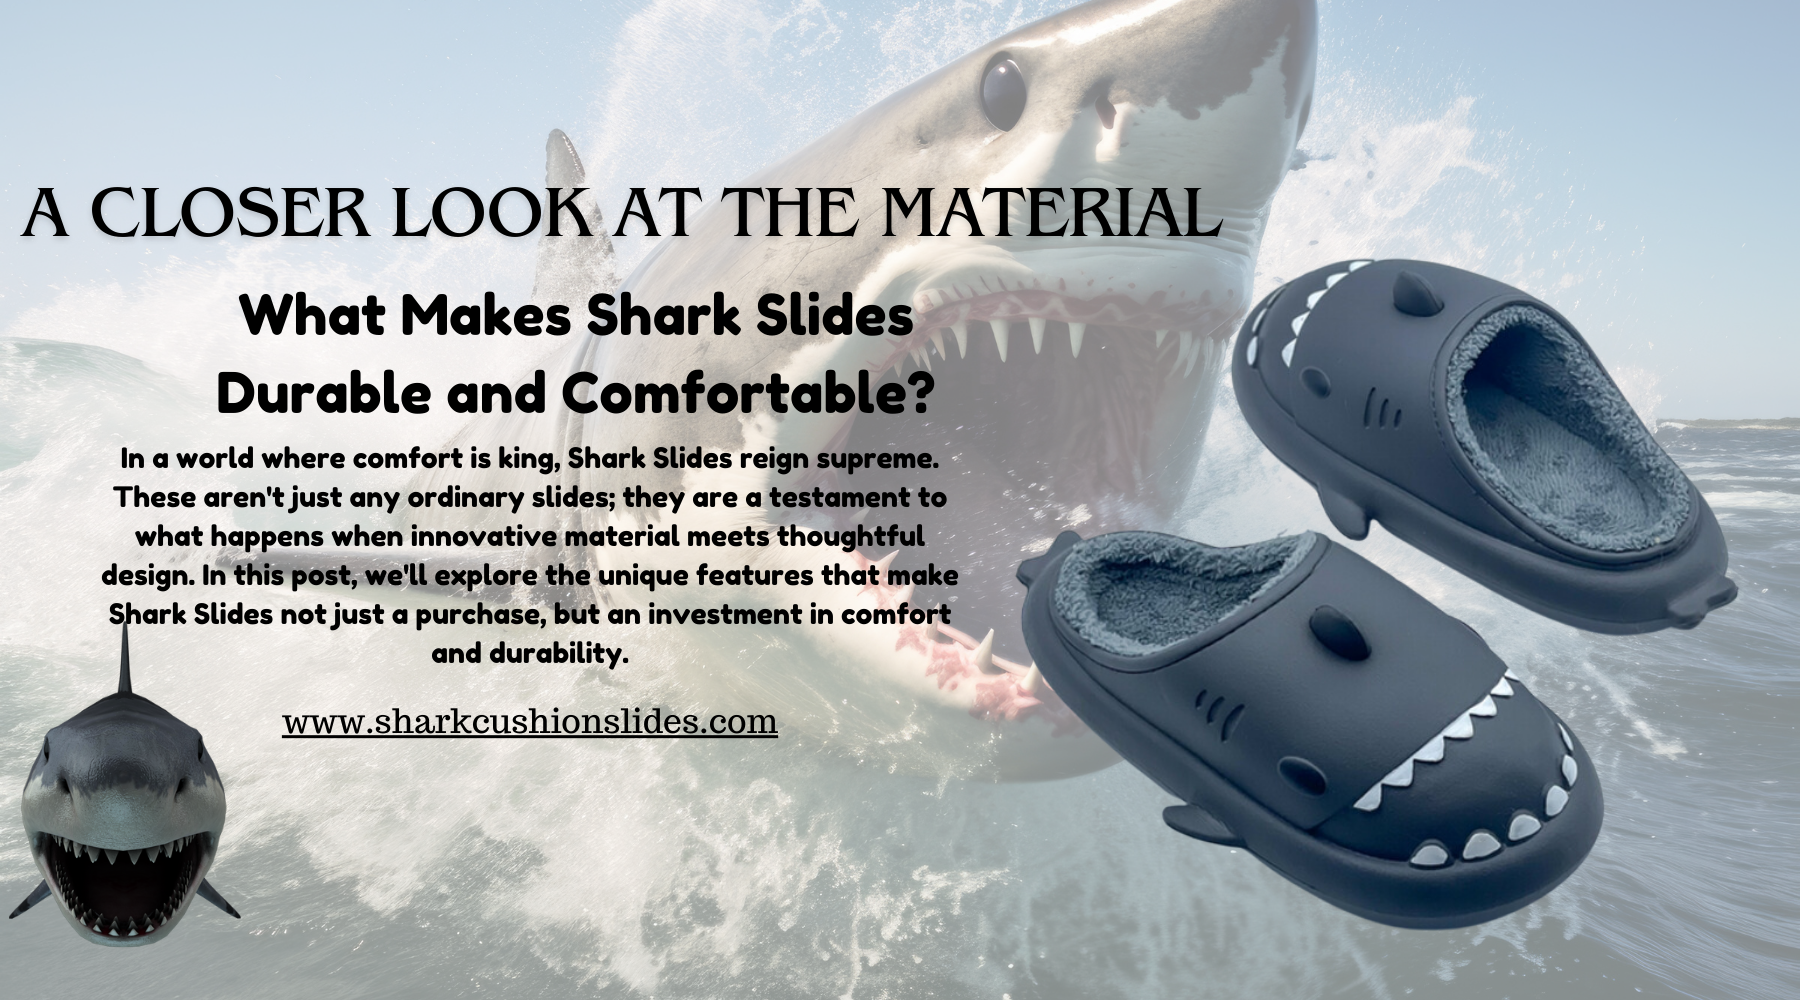 A Closer Look at the Material: What Makes Shark Slides Durable and Comfortable?